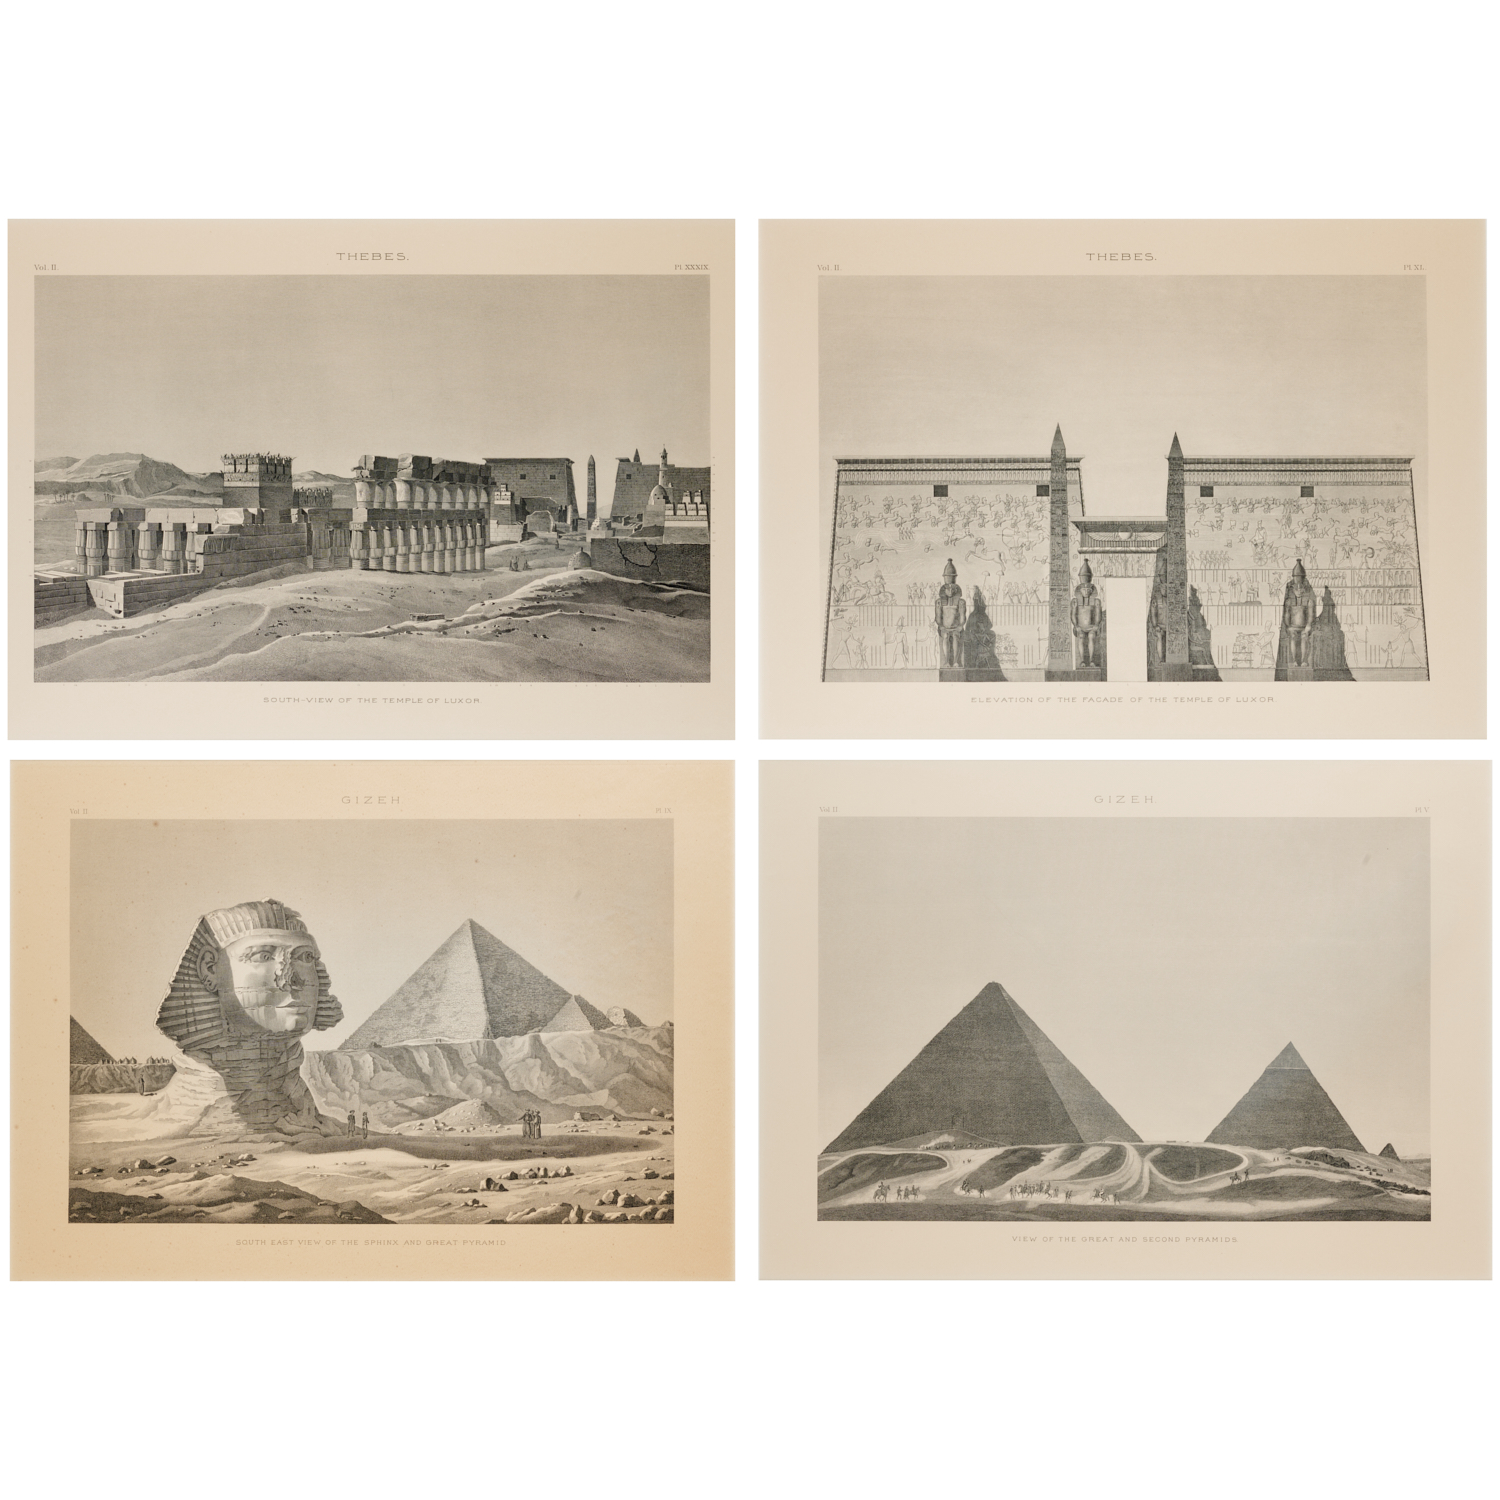 ANCIENT EGYPT, THEBES AND GIZEH,